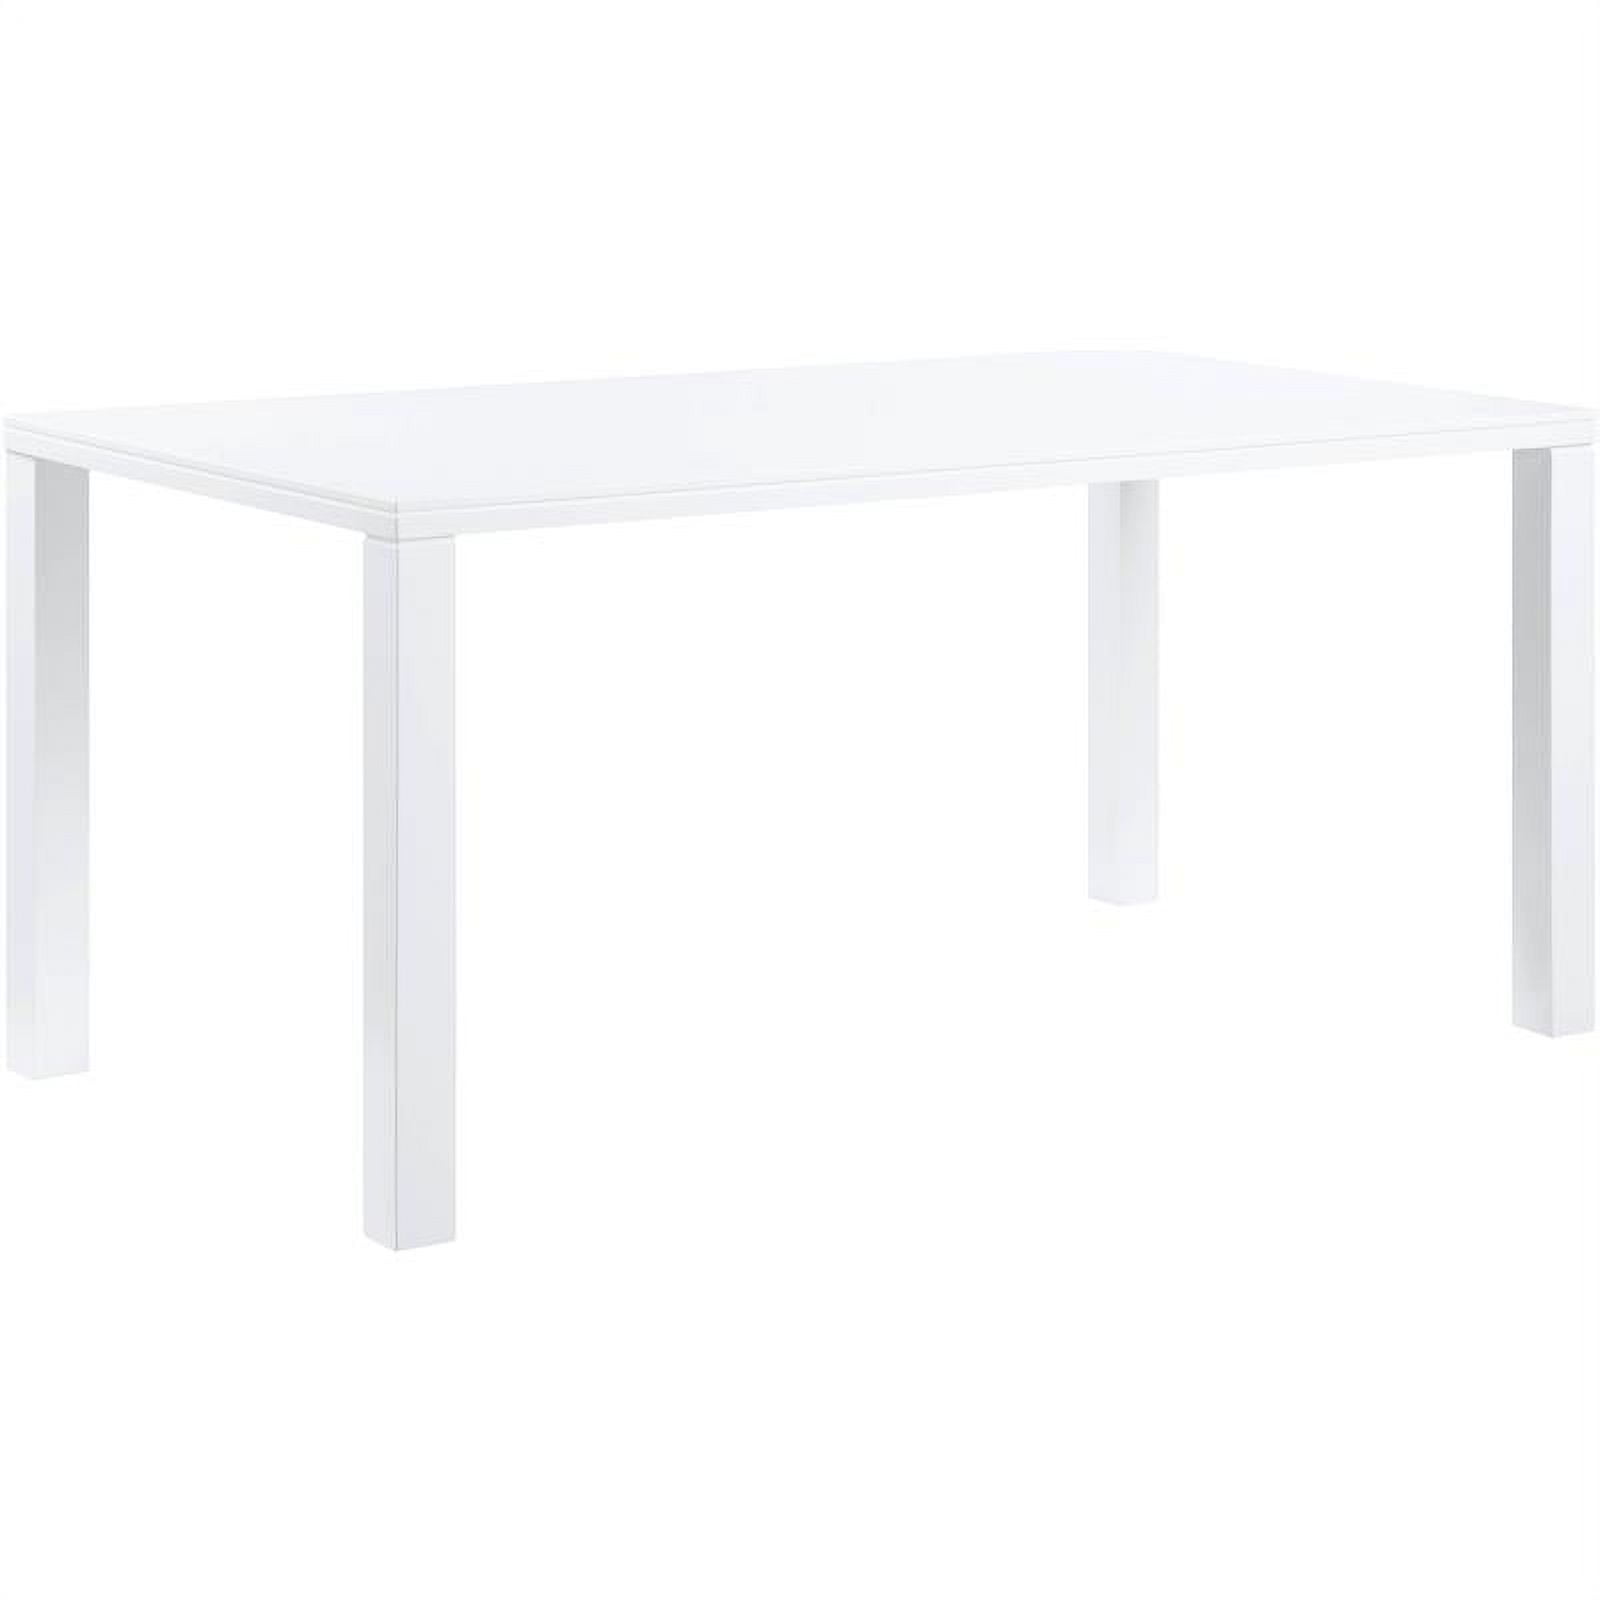 Picture of Acme Furniture DN00740 30 x 35 x 67 in. Pagan Dining Table, White